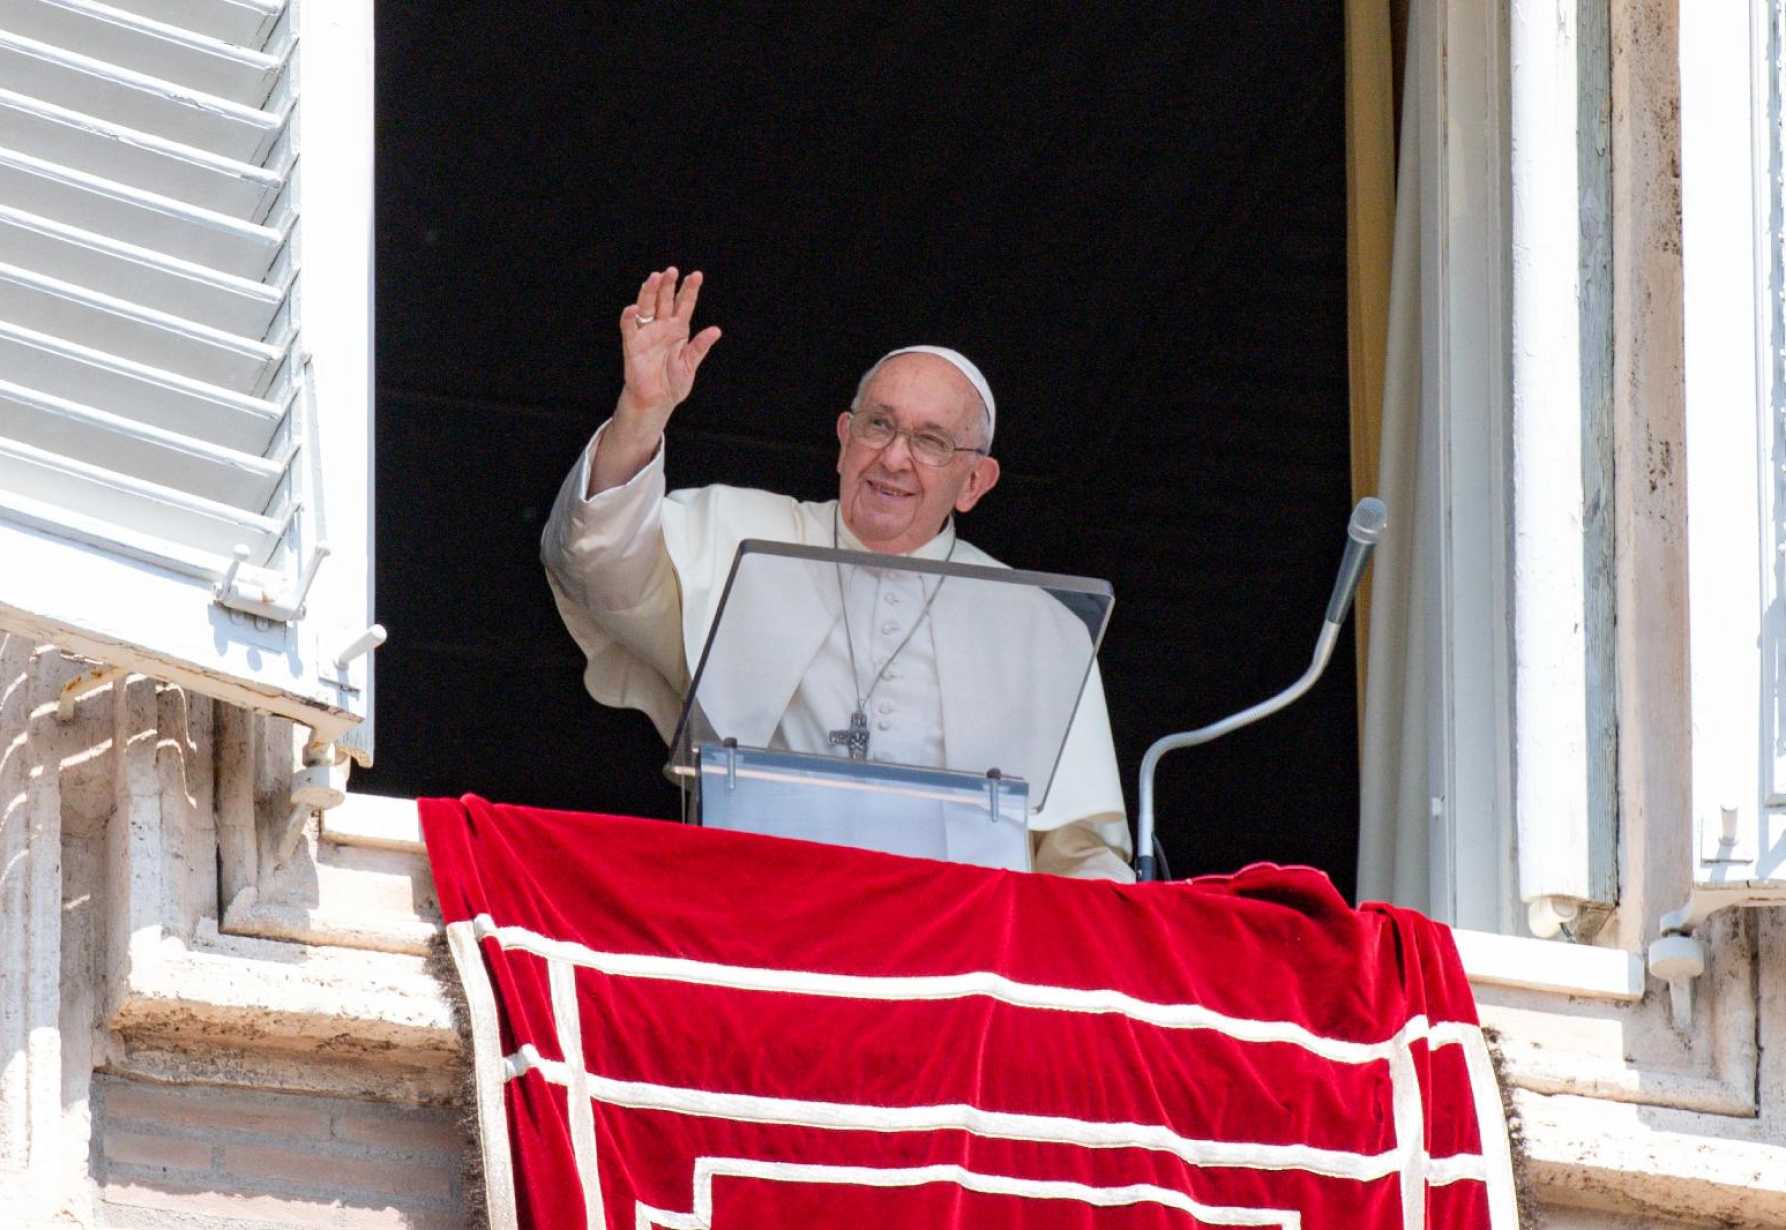 'Rigidity is bad, but firmness is good,' pope says at Angelus